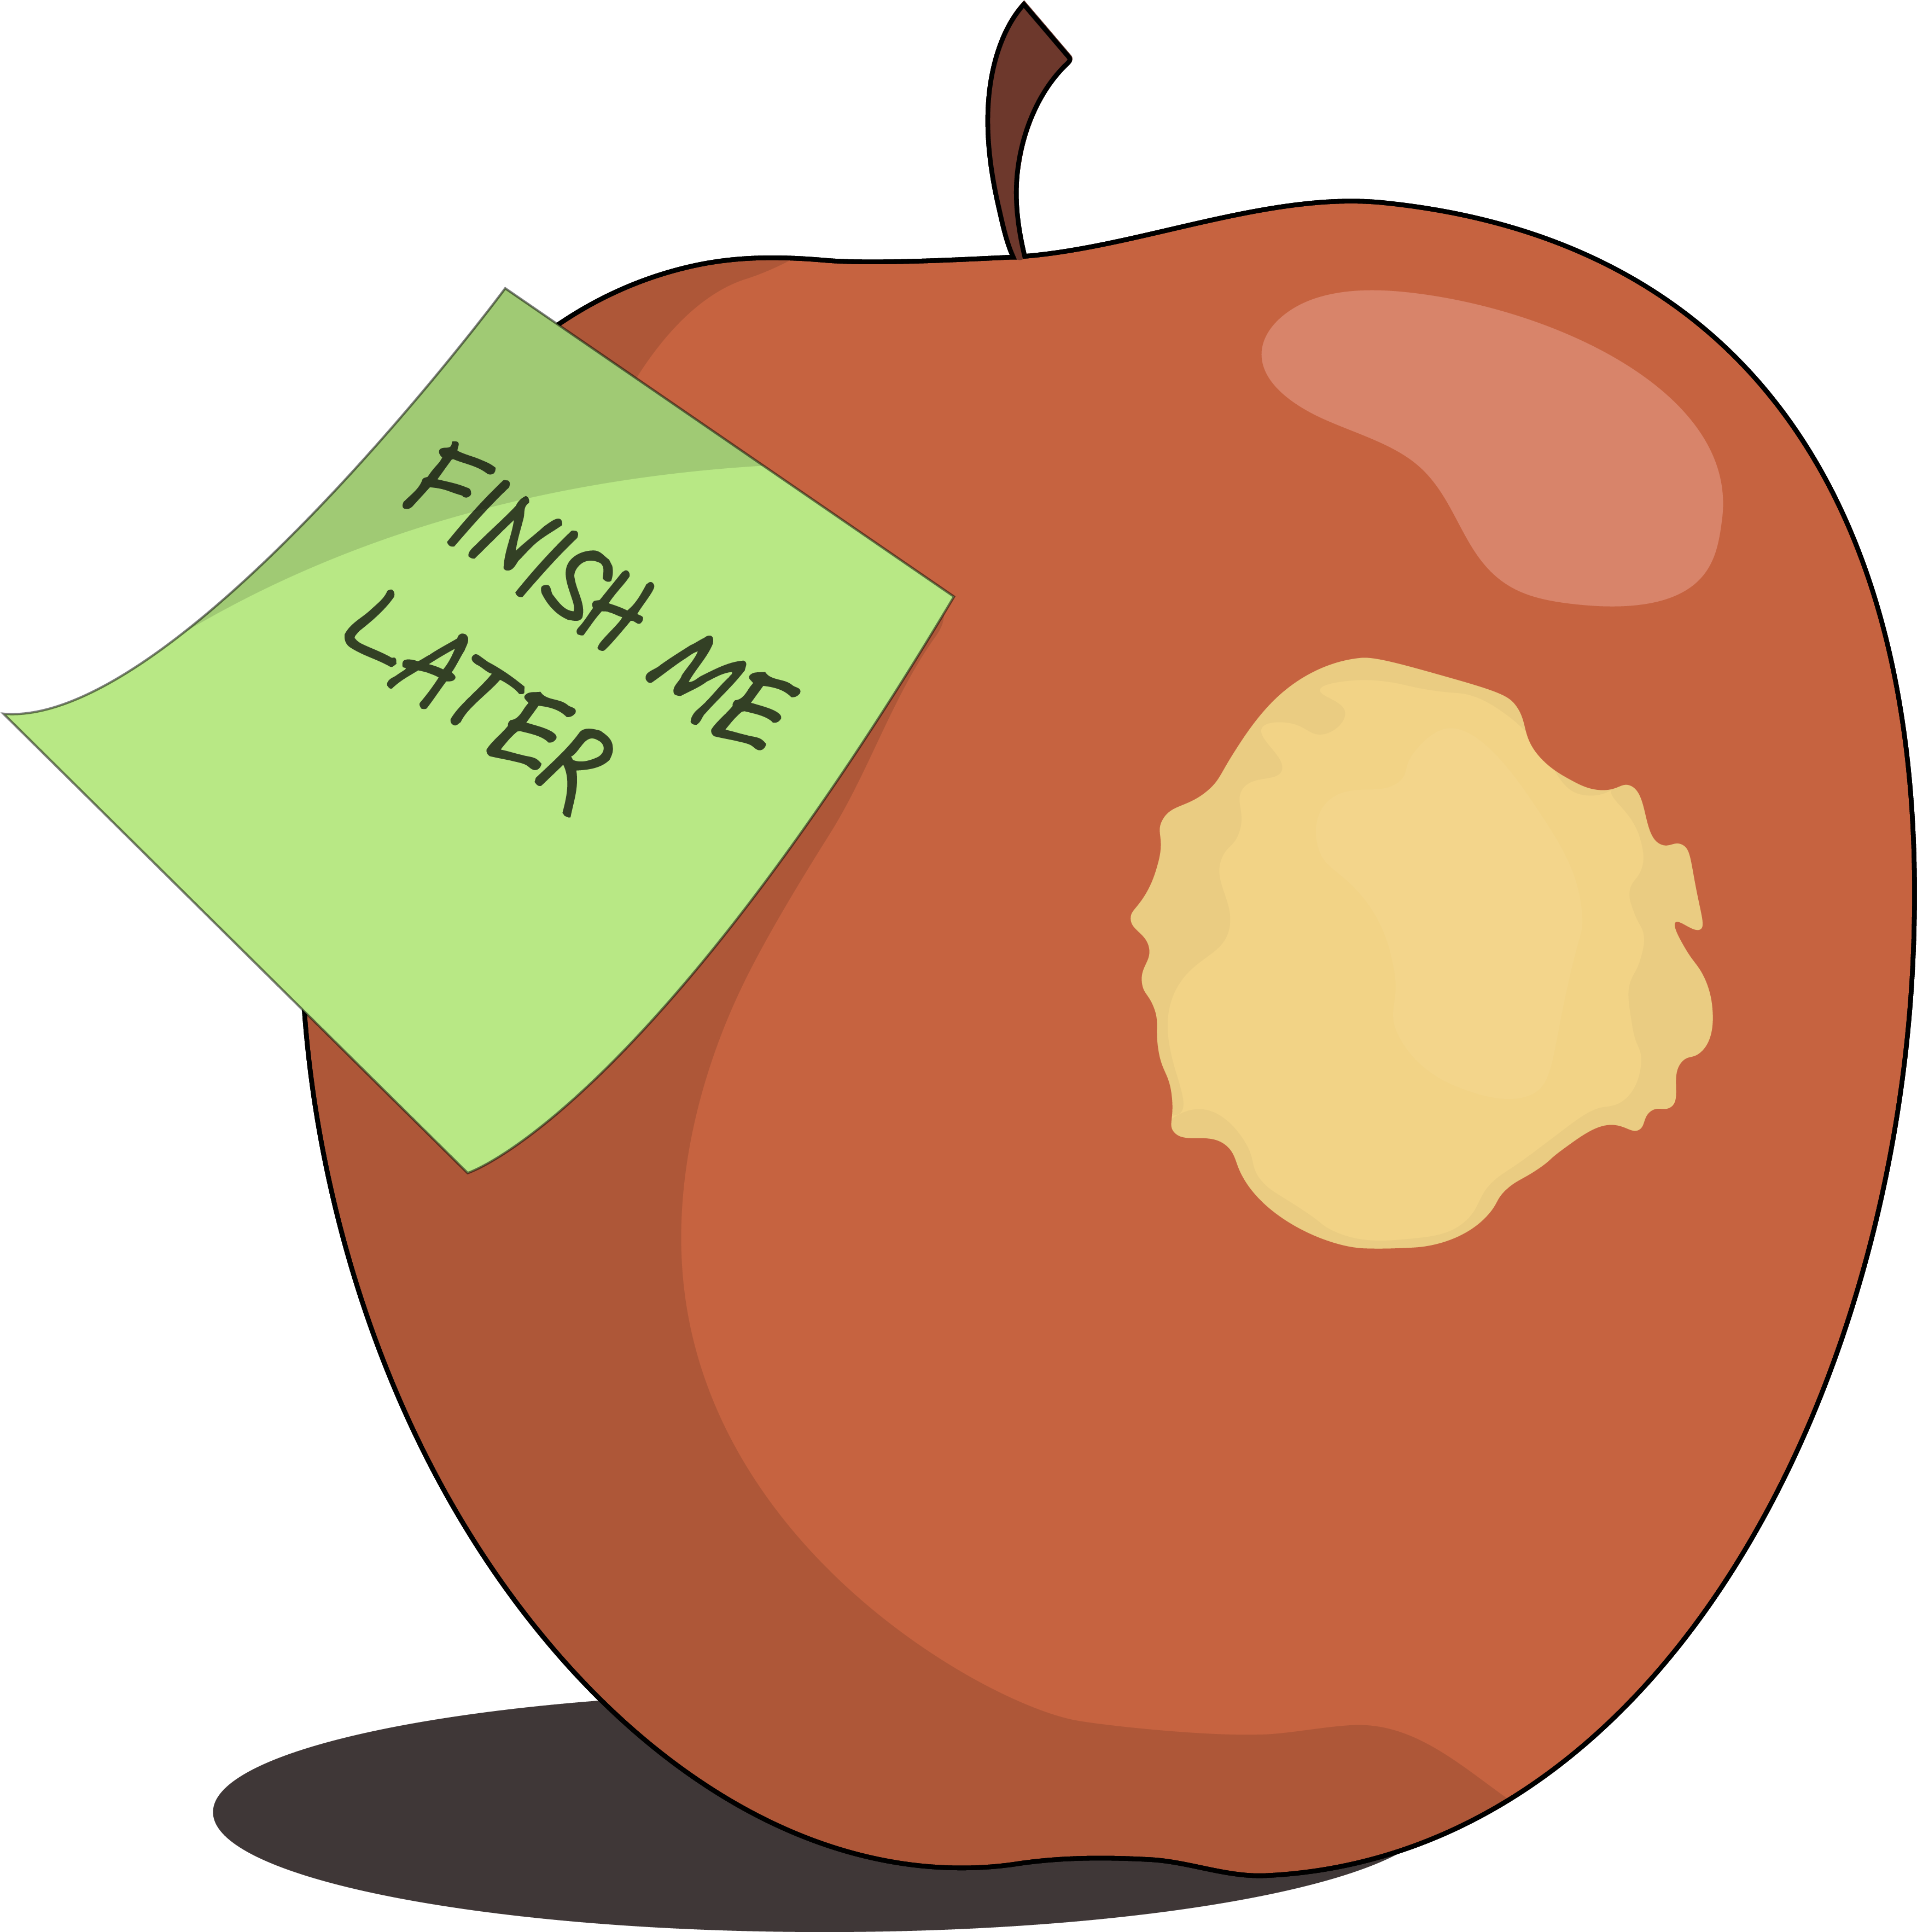 An apple that has had a bite taken out of it, along with a note reminding someone to finish the rest later.